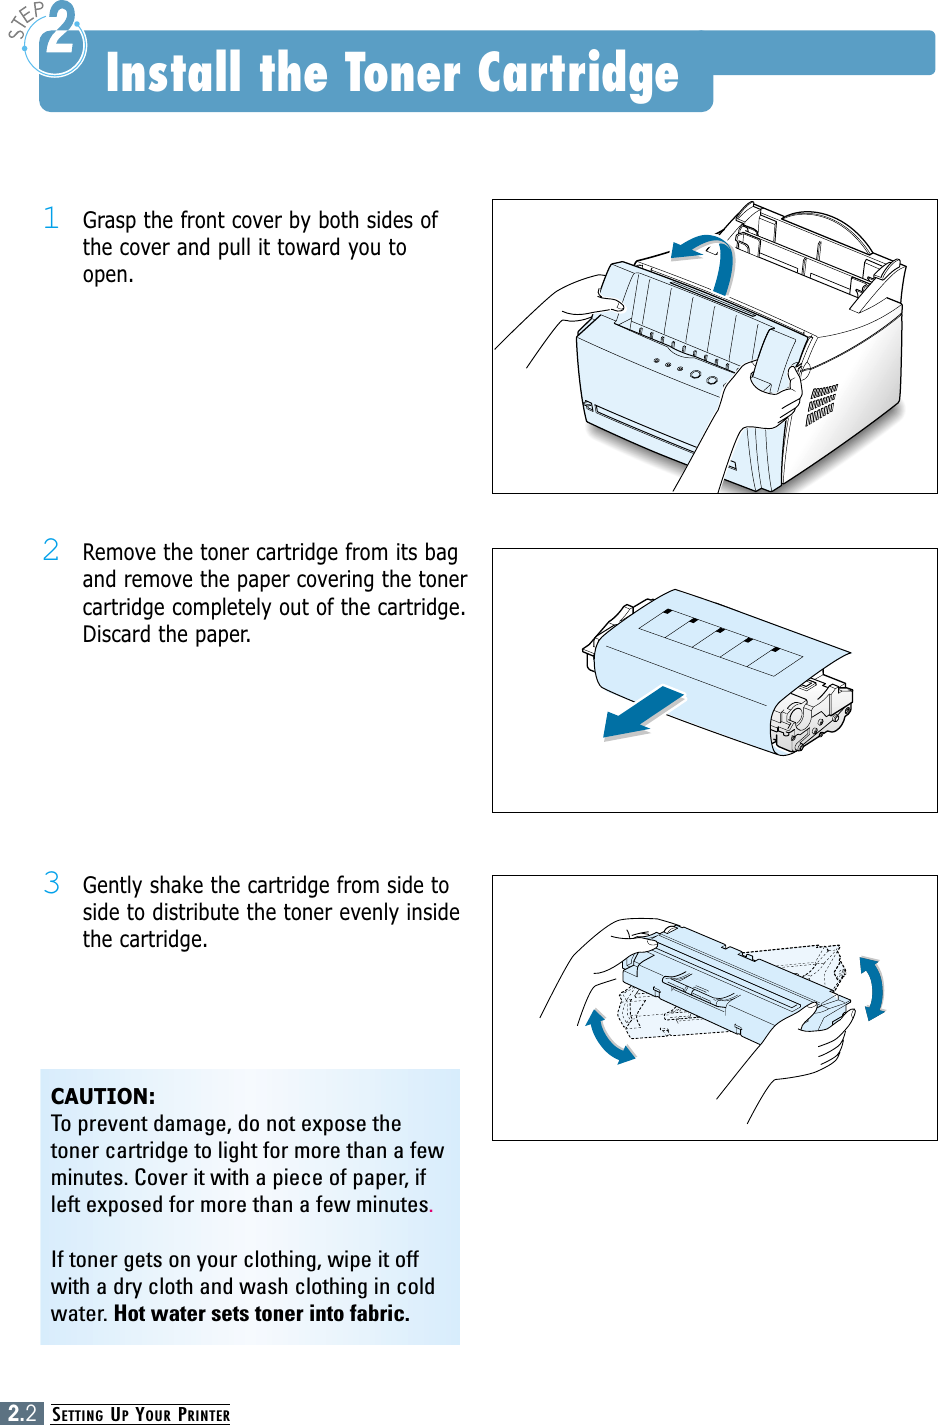 SETTING UPYOUR PRINTER2.21Grasp the front cover by both sides ofthe cover and pull it toward you toopen.2Remove the toner cartridge from its bagand remove the paper covering the tonercartridge completely out of the cartridge.Discard the paper.3Gently shake the cartridge from side toside to distribute the toner evenly insidethe cartridge.CAUTION:To prevent damage, do not expose thetoner cartridge to light for more than a fewminutes. Cover it with a piece of paper, ifleft exposed for more than a few minutes.If toner gets on your clothing, wipe it offwith a dry cloth and wash clothing in coldwater. Hot water sets toner into fabric.Install the Toner Cartridge